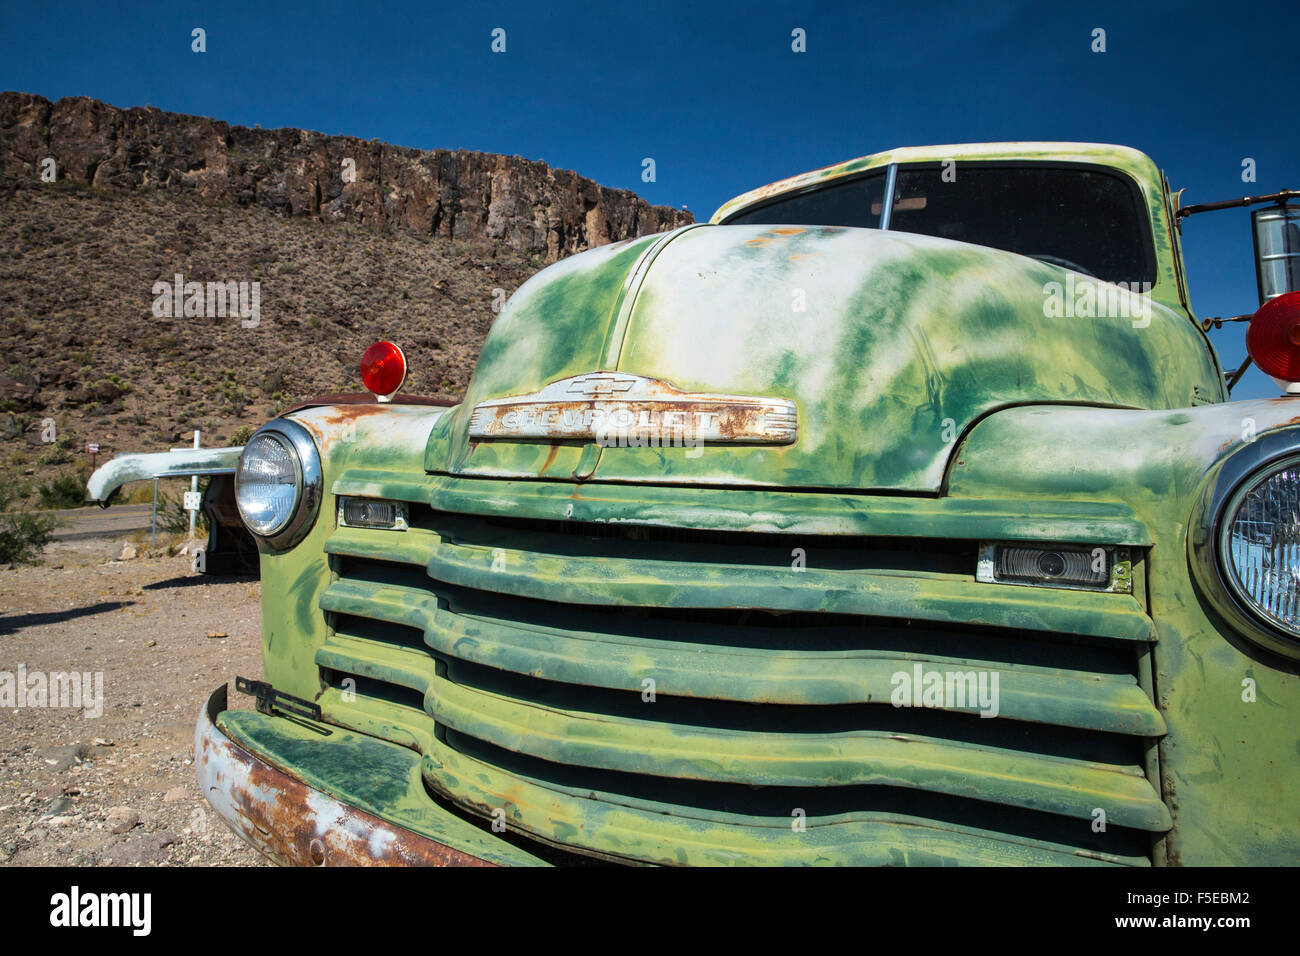 Truck America Route 66 High Resolution Stock Photography and Images - Alamy